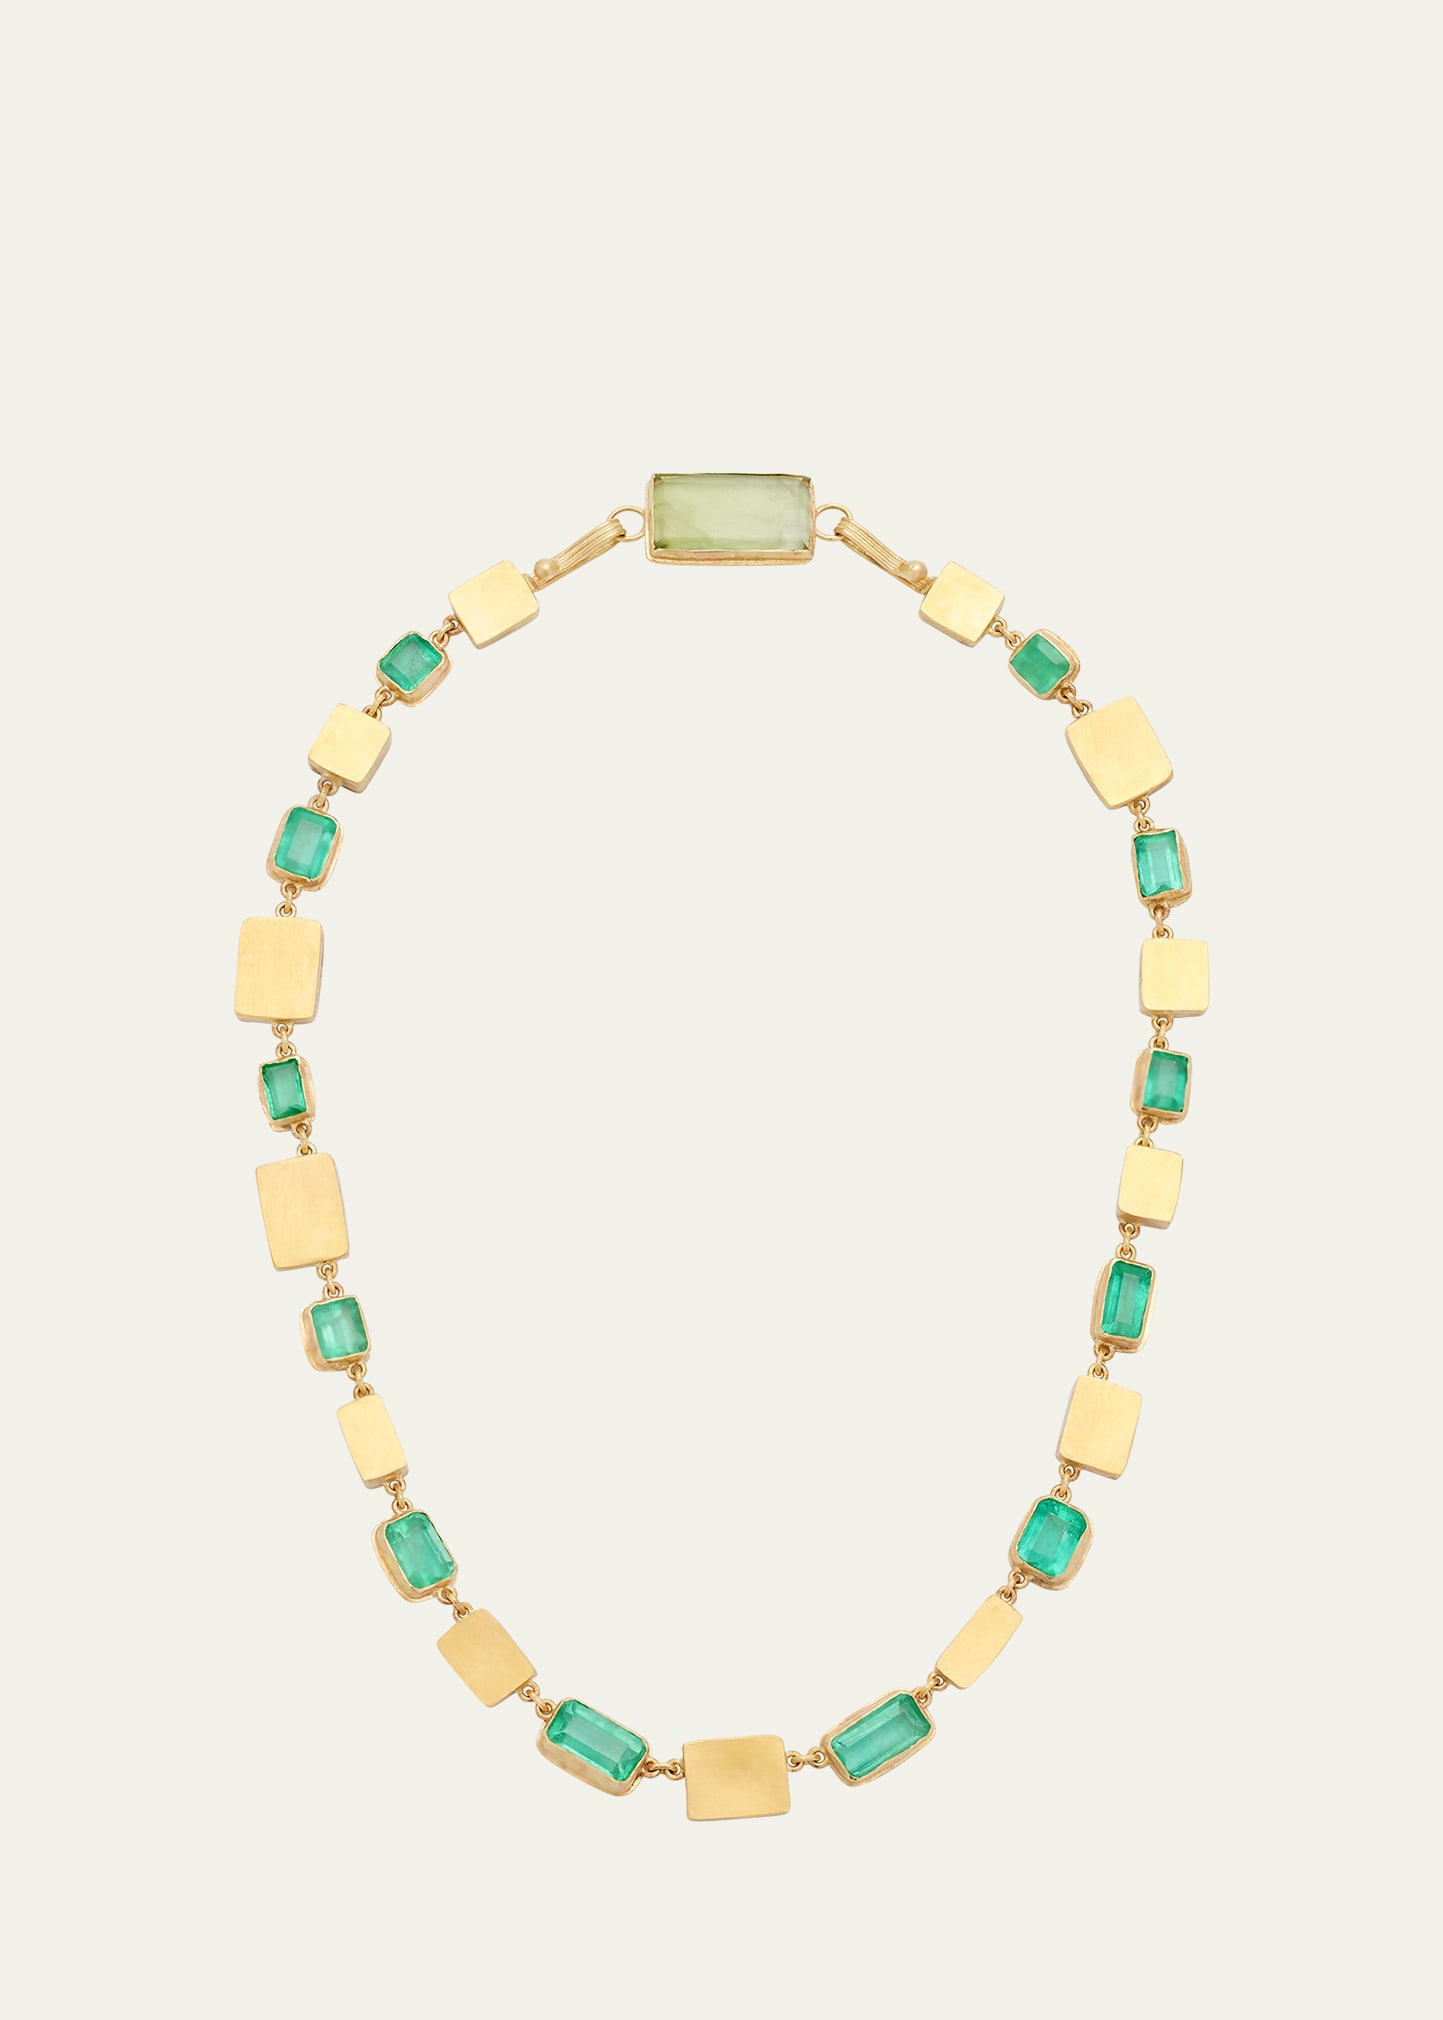 JUDY GEIB Gold Box Necklace with Colombian Emeralds and Peridot Clasp